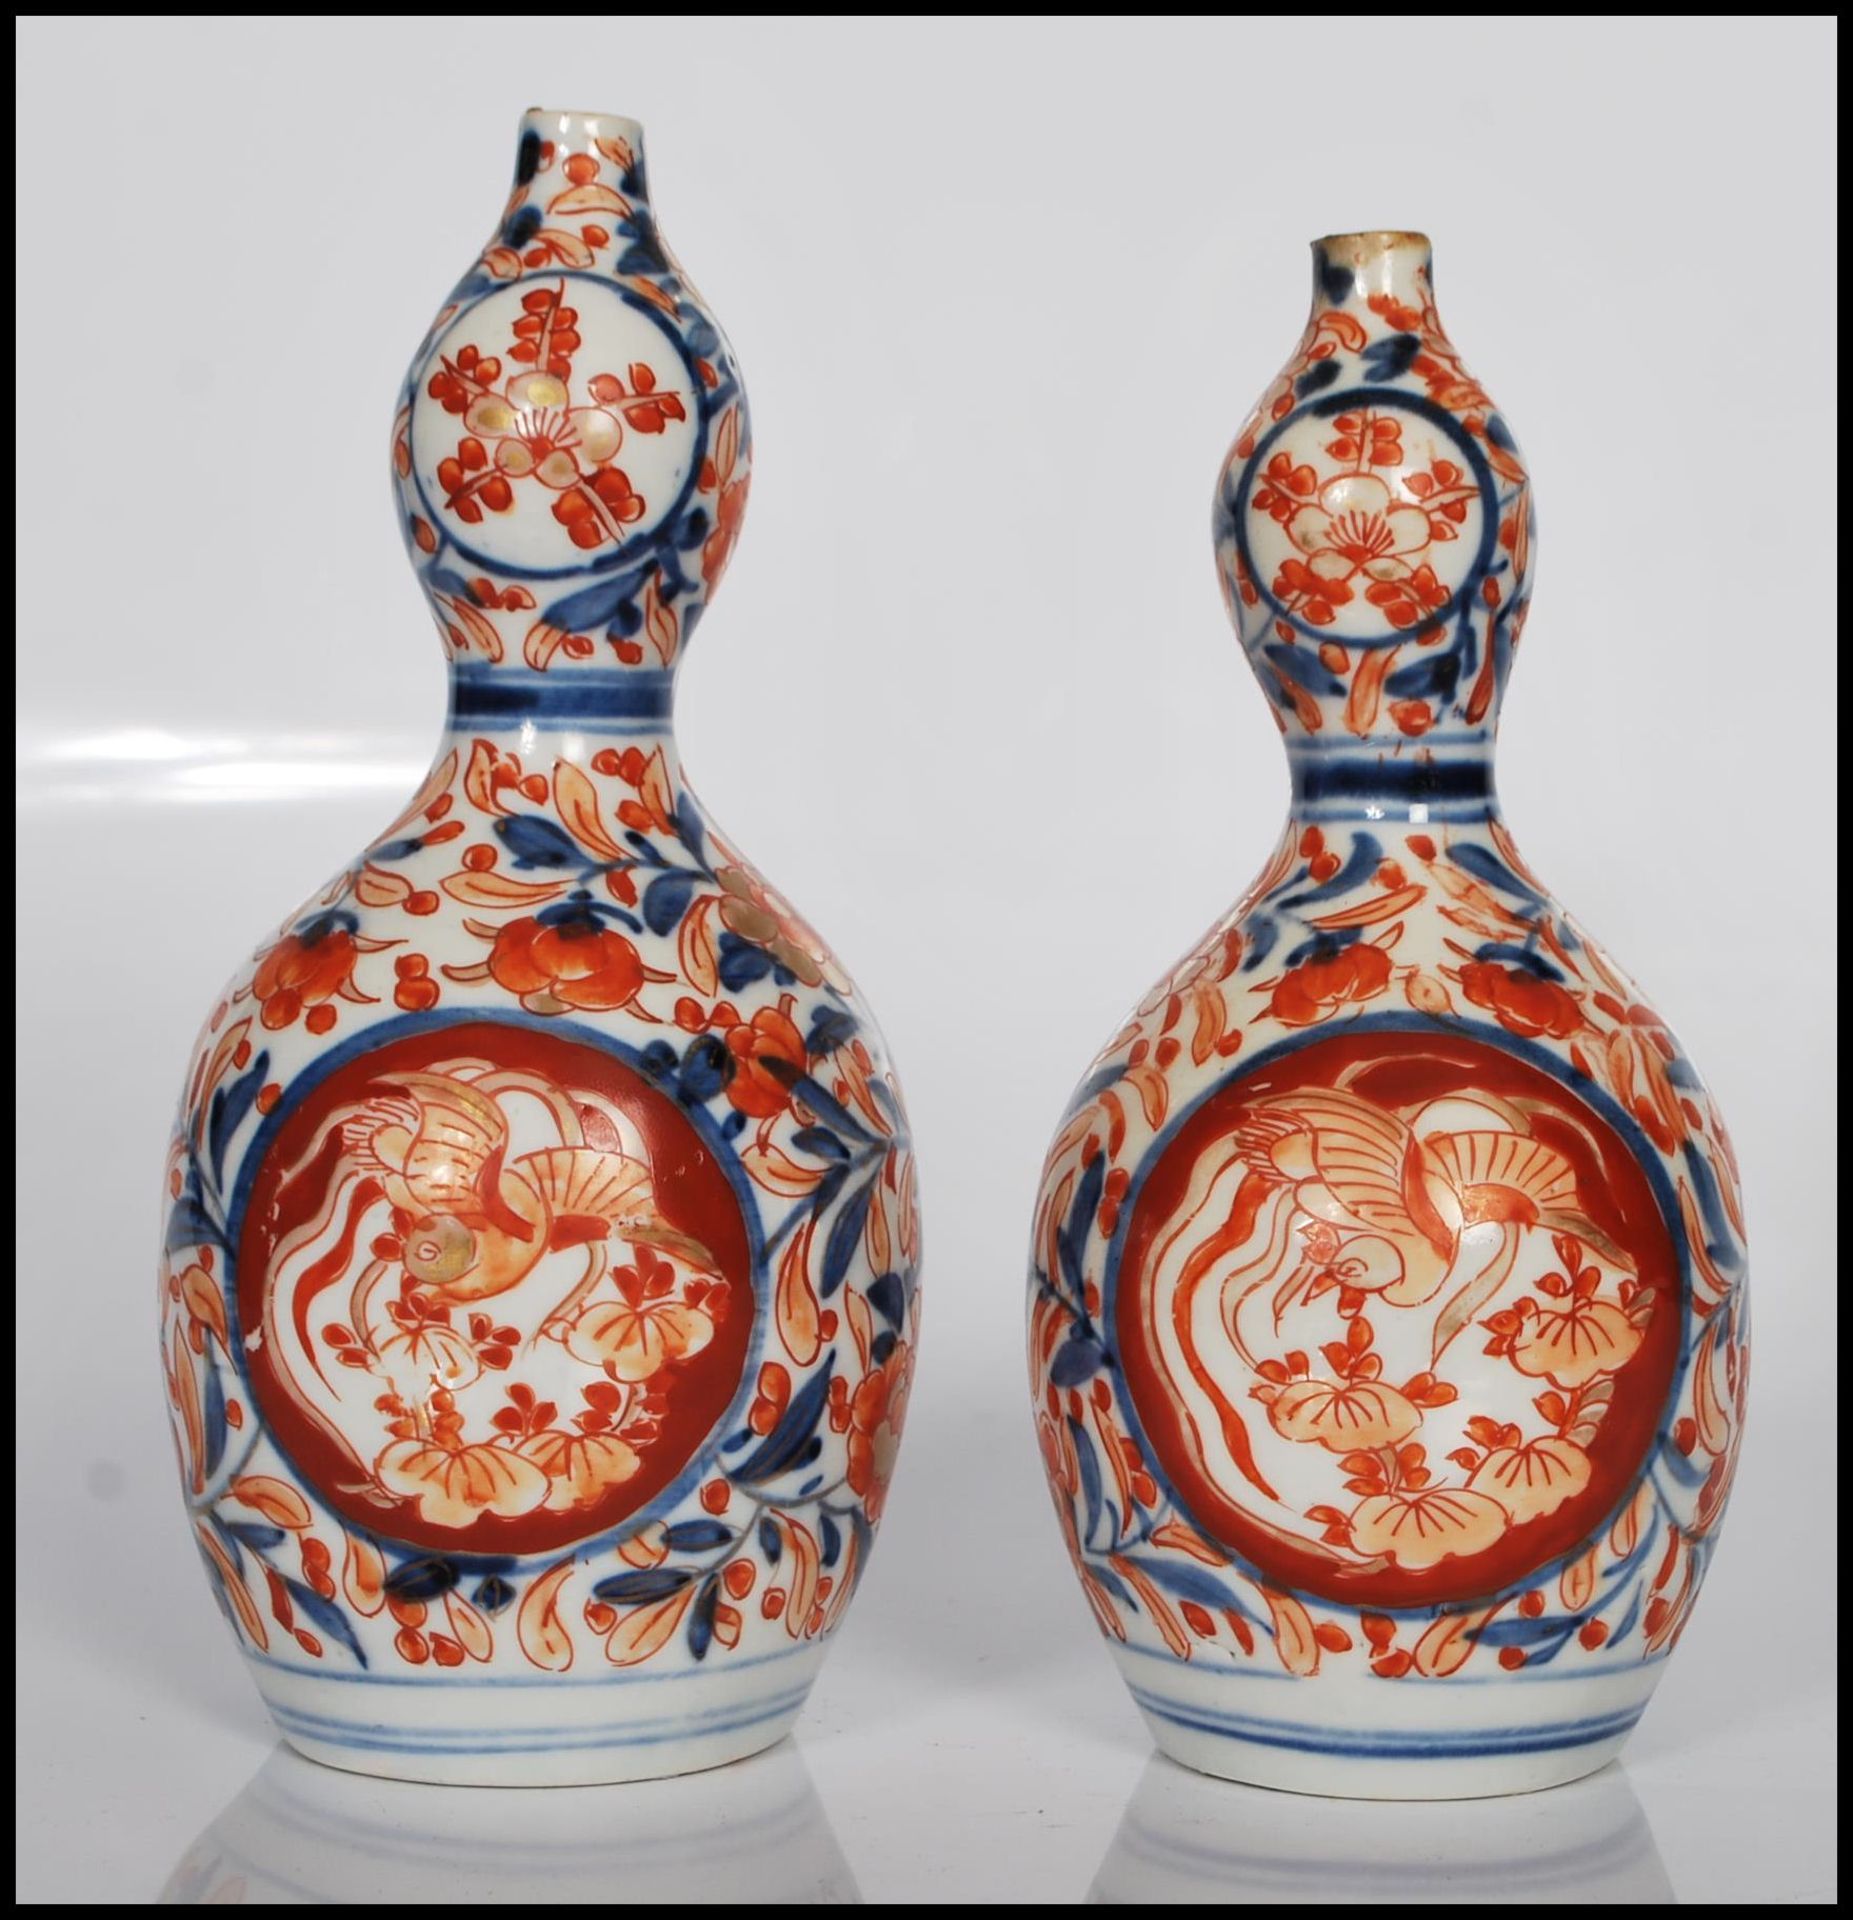 A pair of 19th Century Imari red, blue and white Japanese double gourd vases, having floral